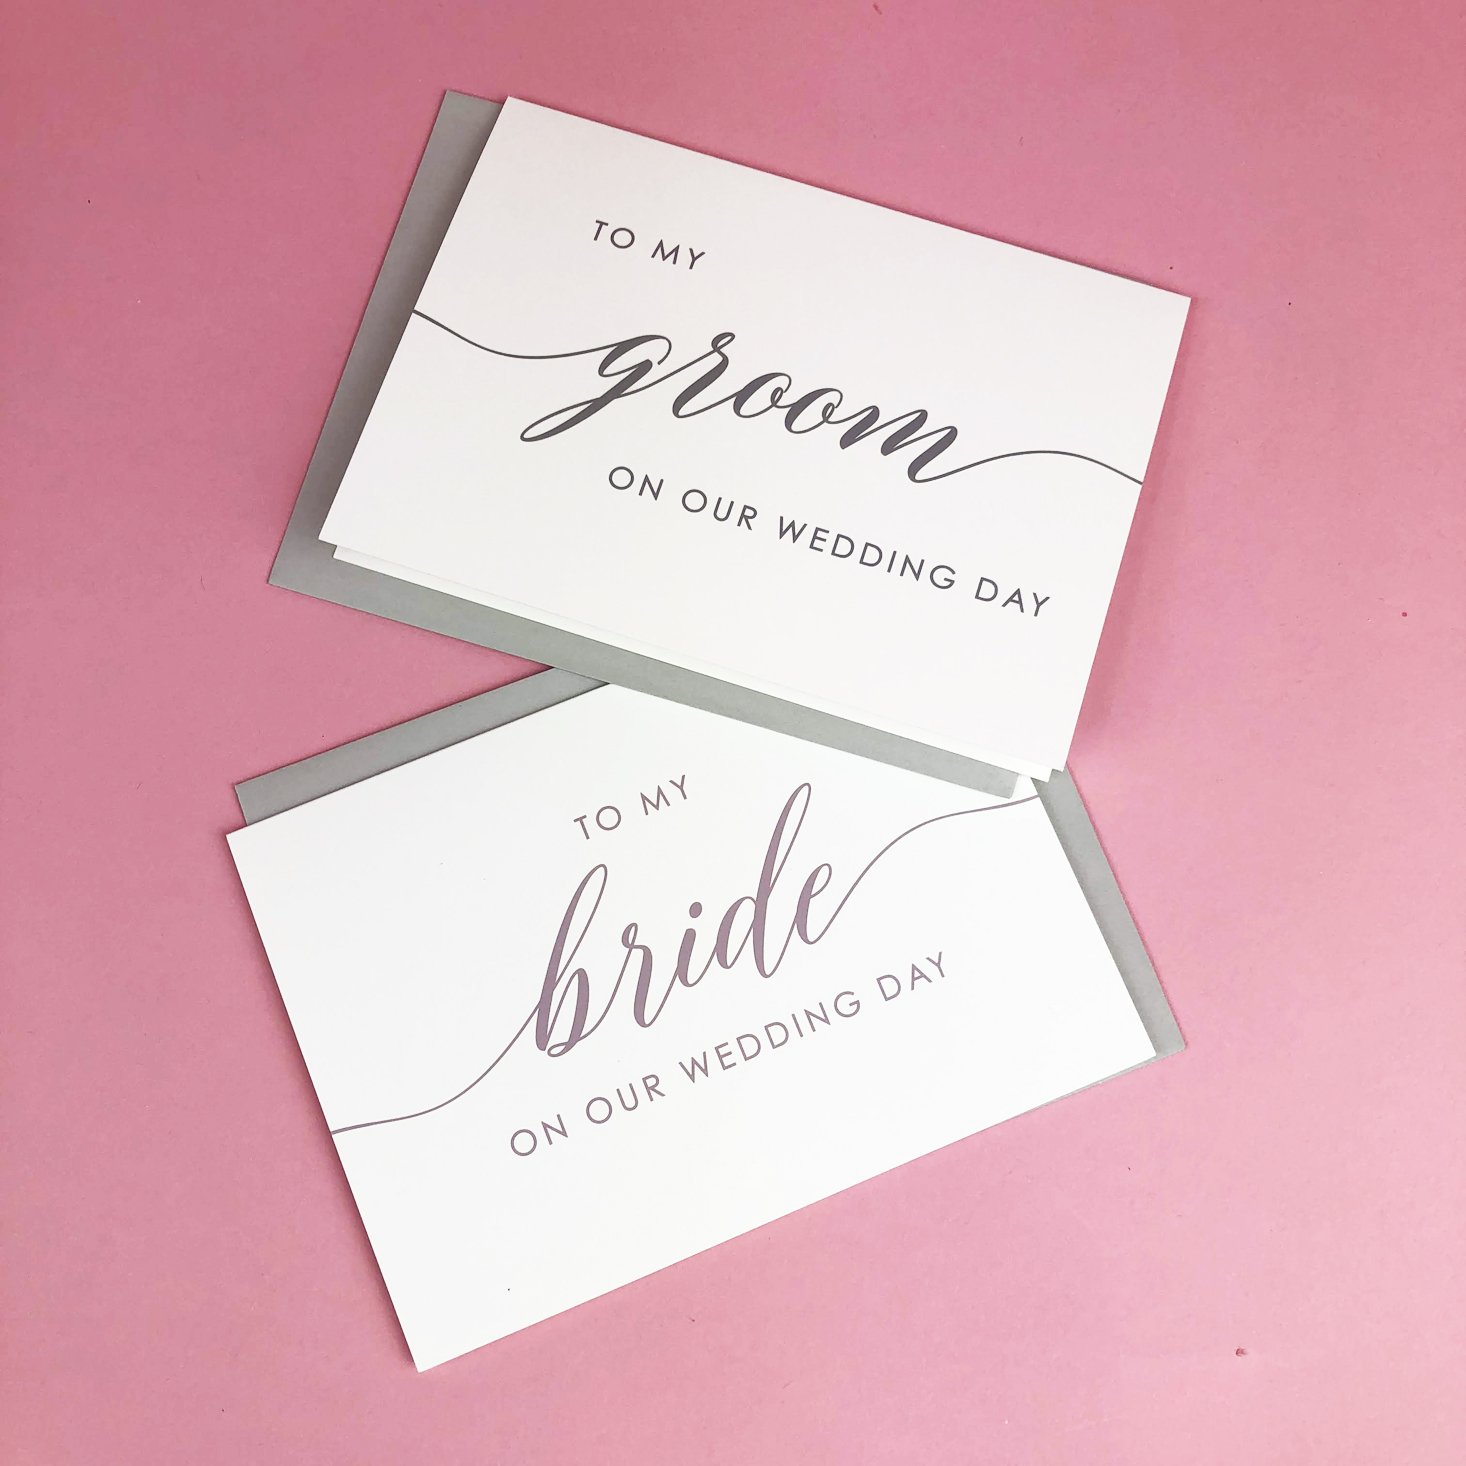 Wedding Day Cards Open